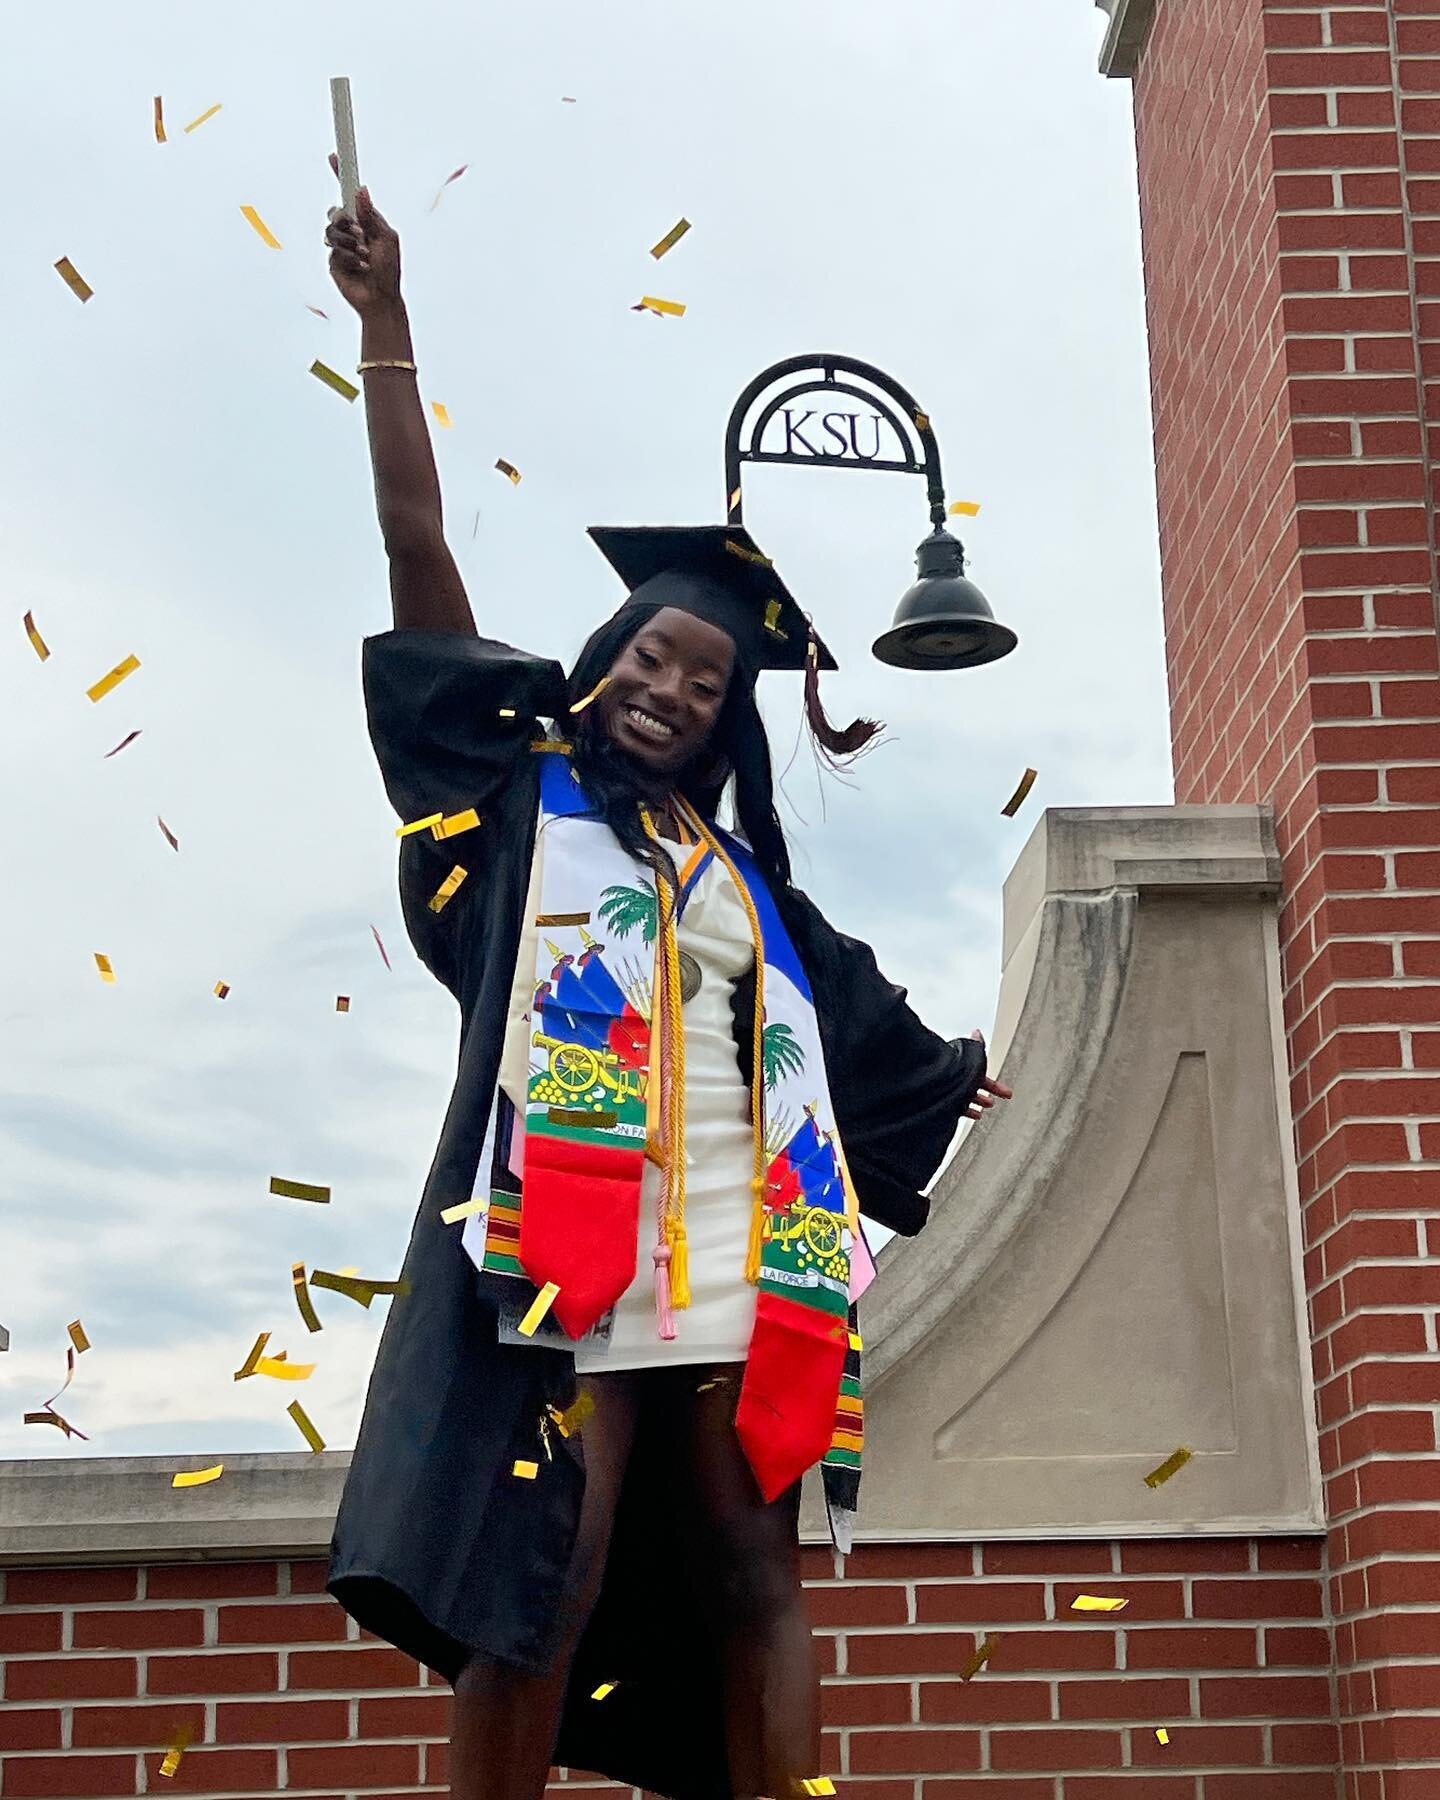 As a first generation Haitian American and college student, these past four years of college and everything leading up to this moment from the day I was born has been a journey. 🇭🇹🎓

When I was 9, I knew I wanted to go to college out of state. Whe